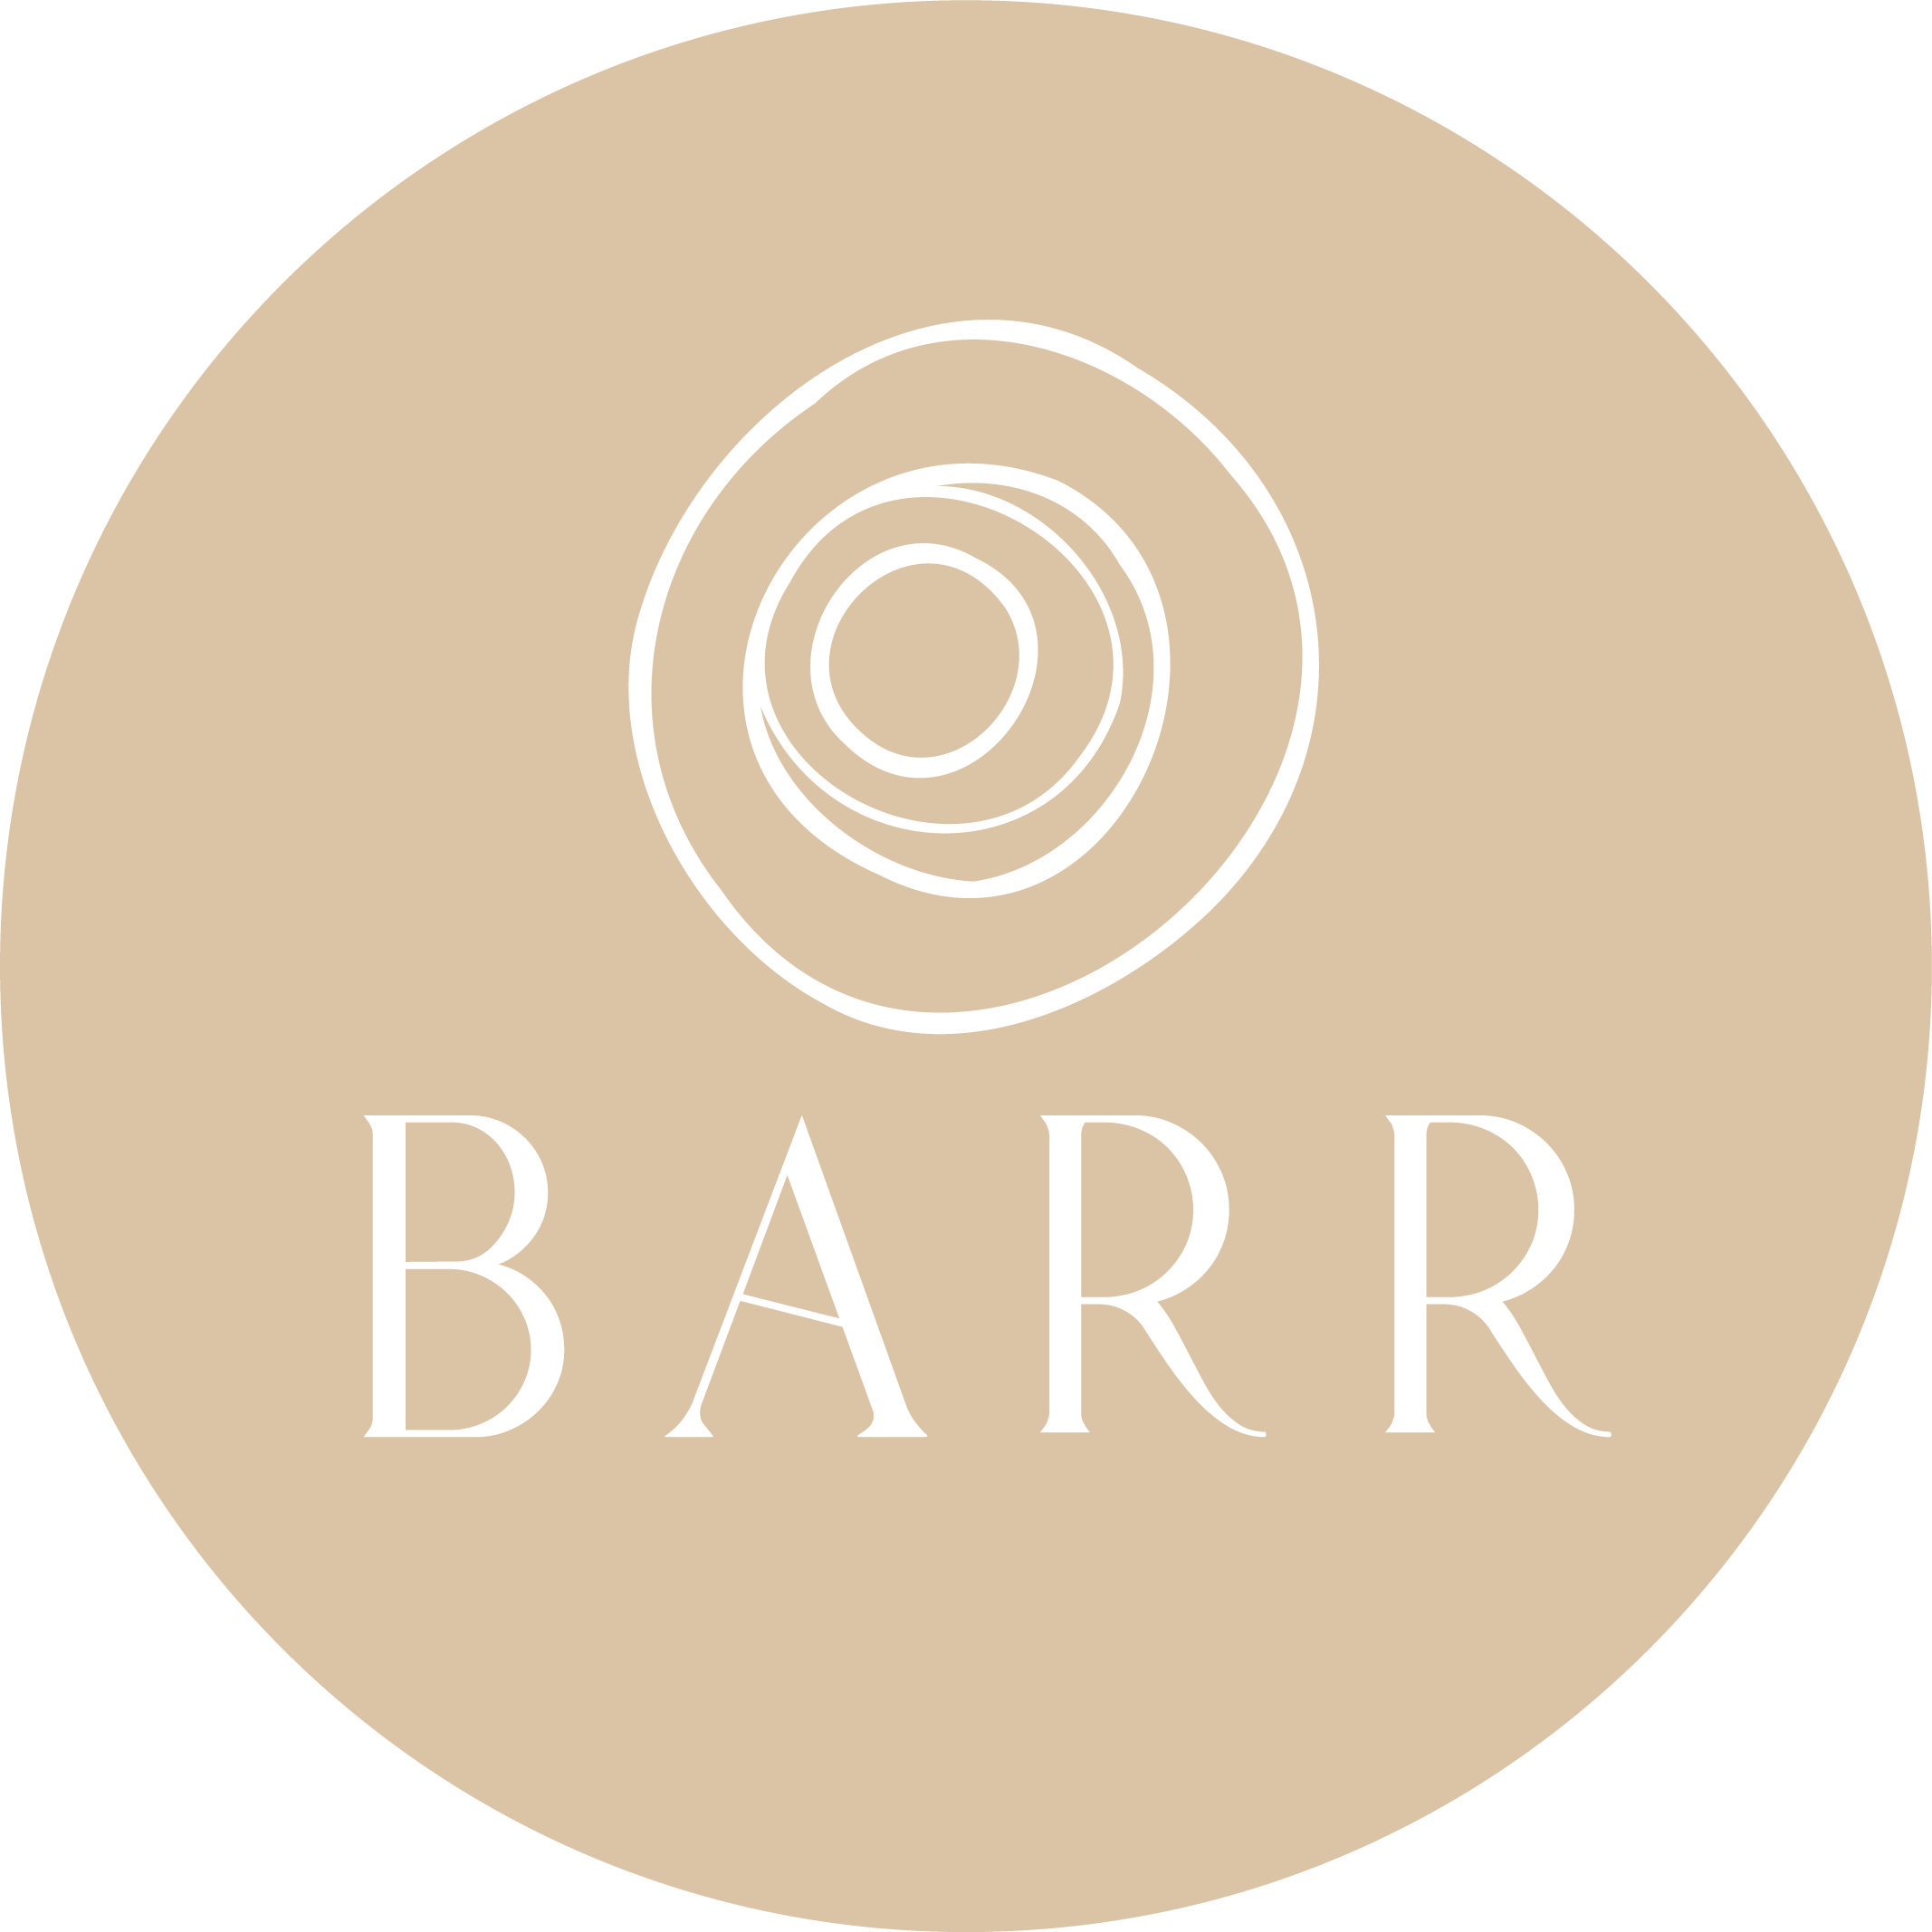 Barr-Mark-white-natural-round.png